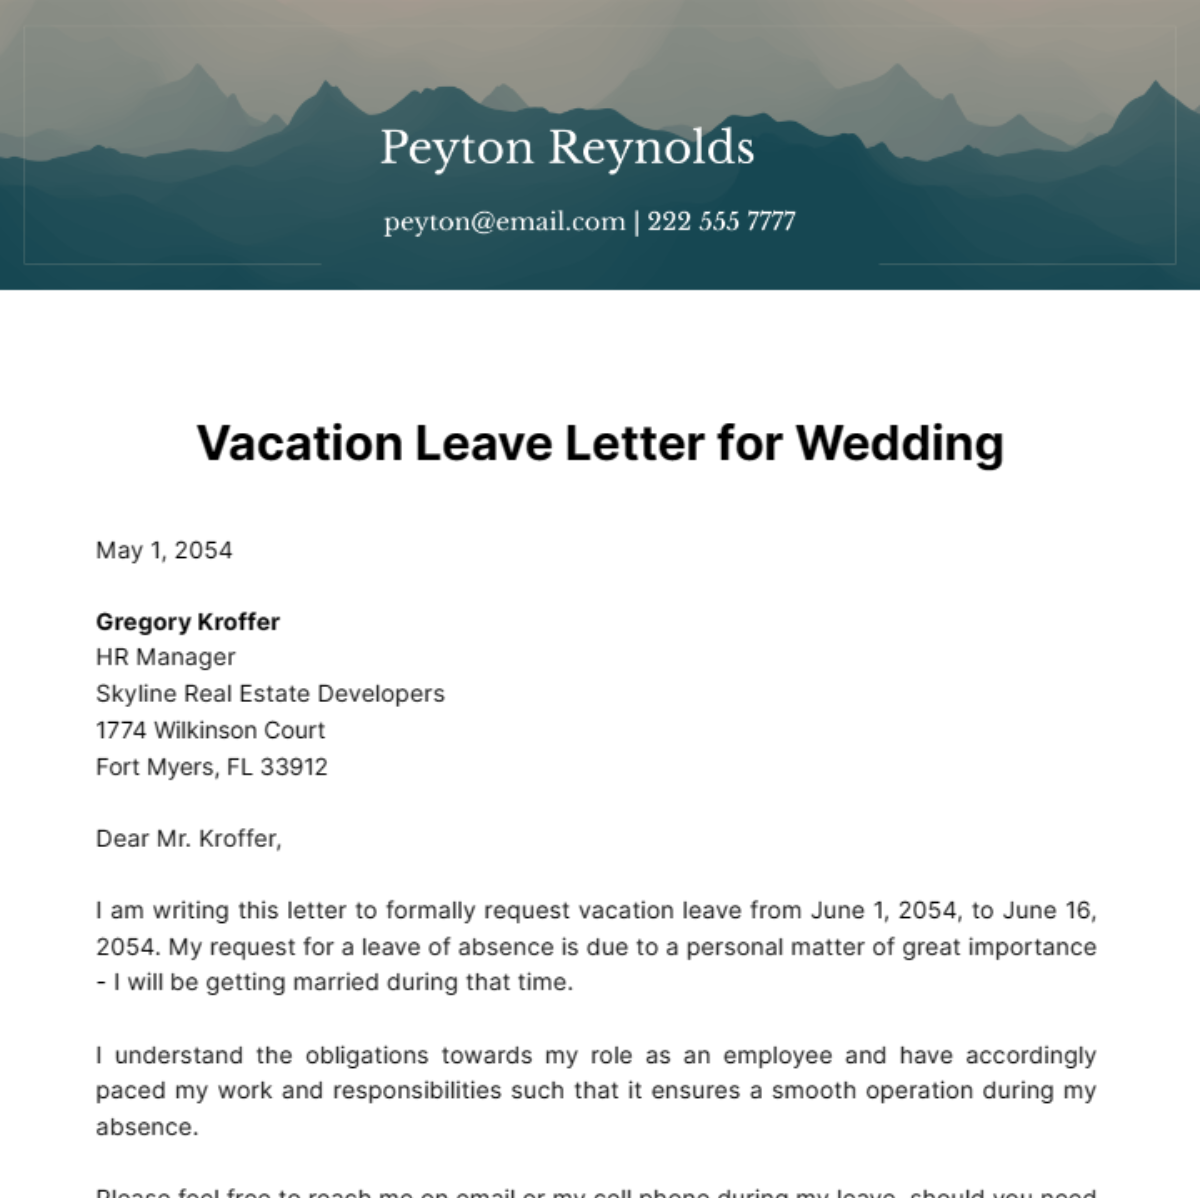 Vacation Leave Letter for Wedding Template